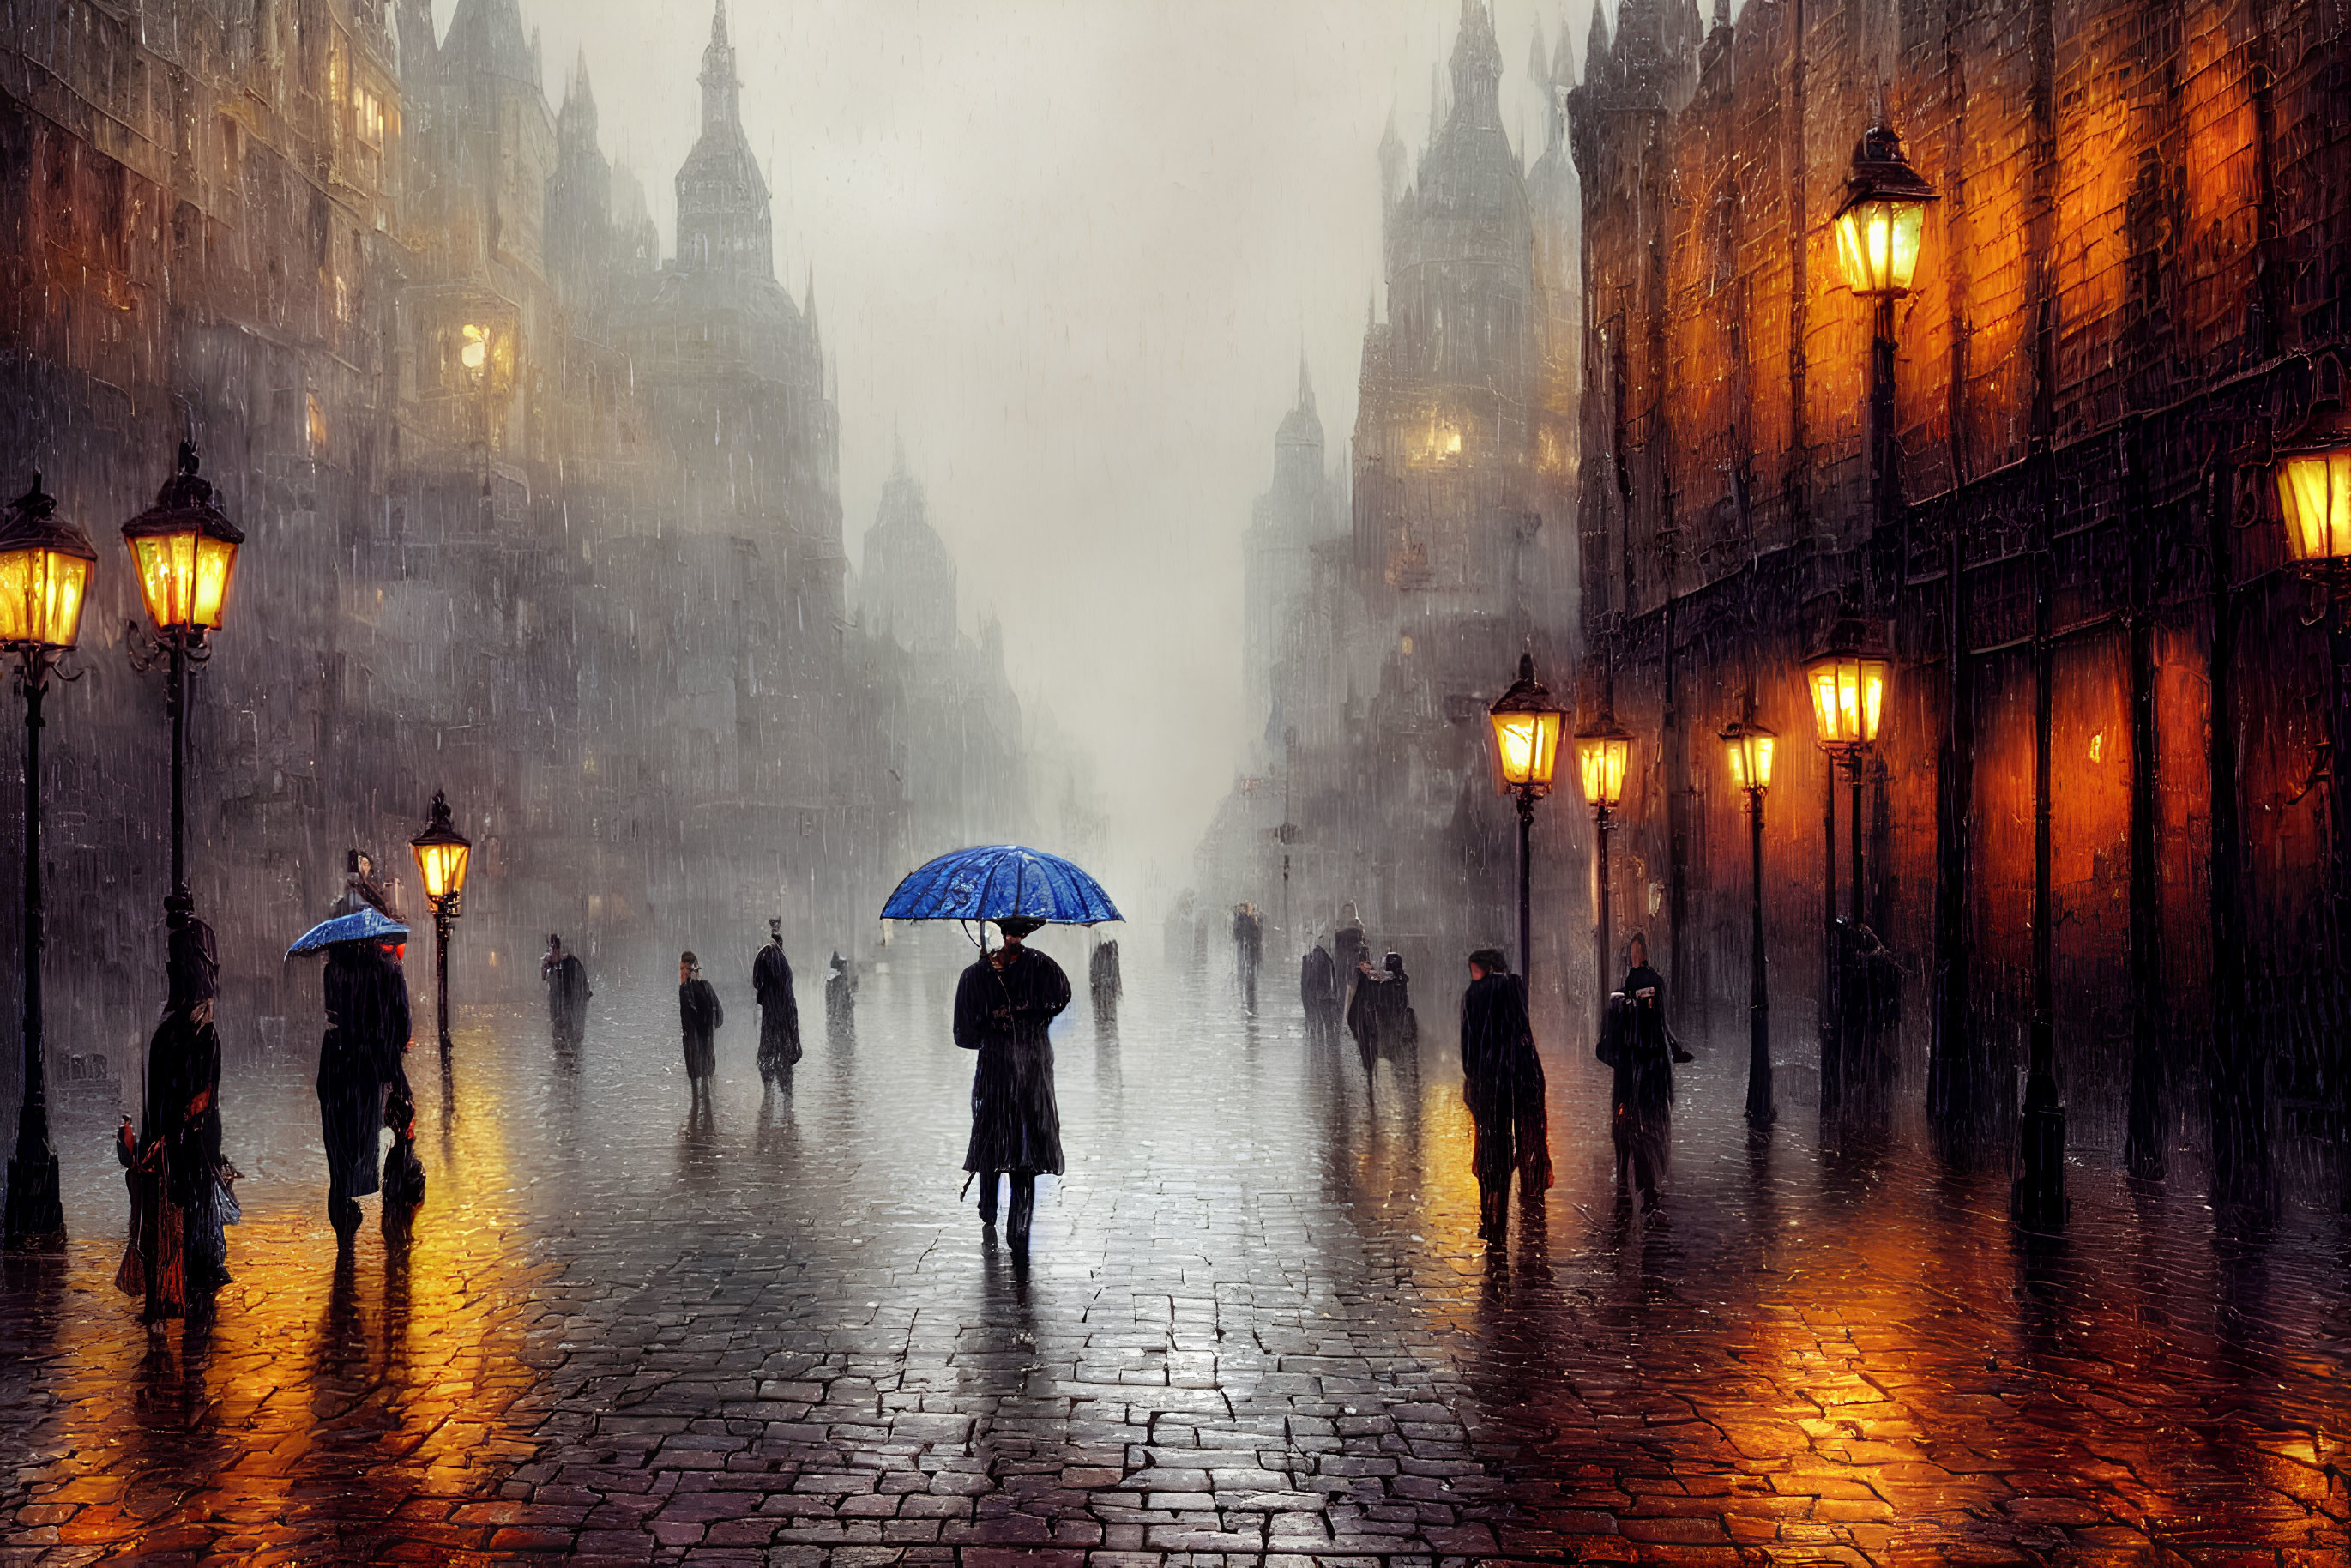 Rainy cobblestone street with people and umbrellas under glowing streetlamps